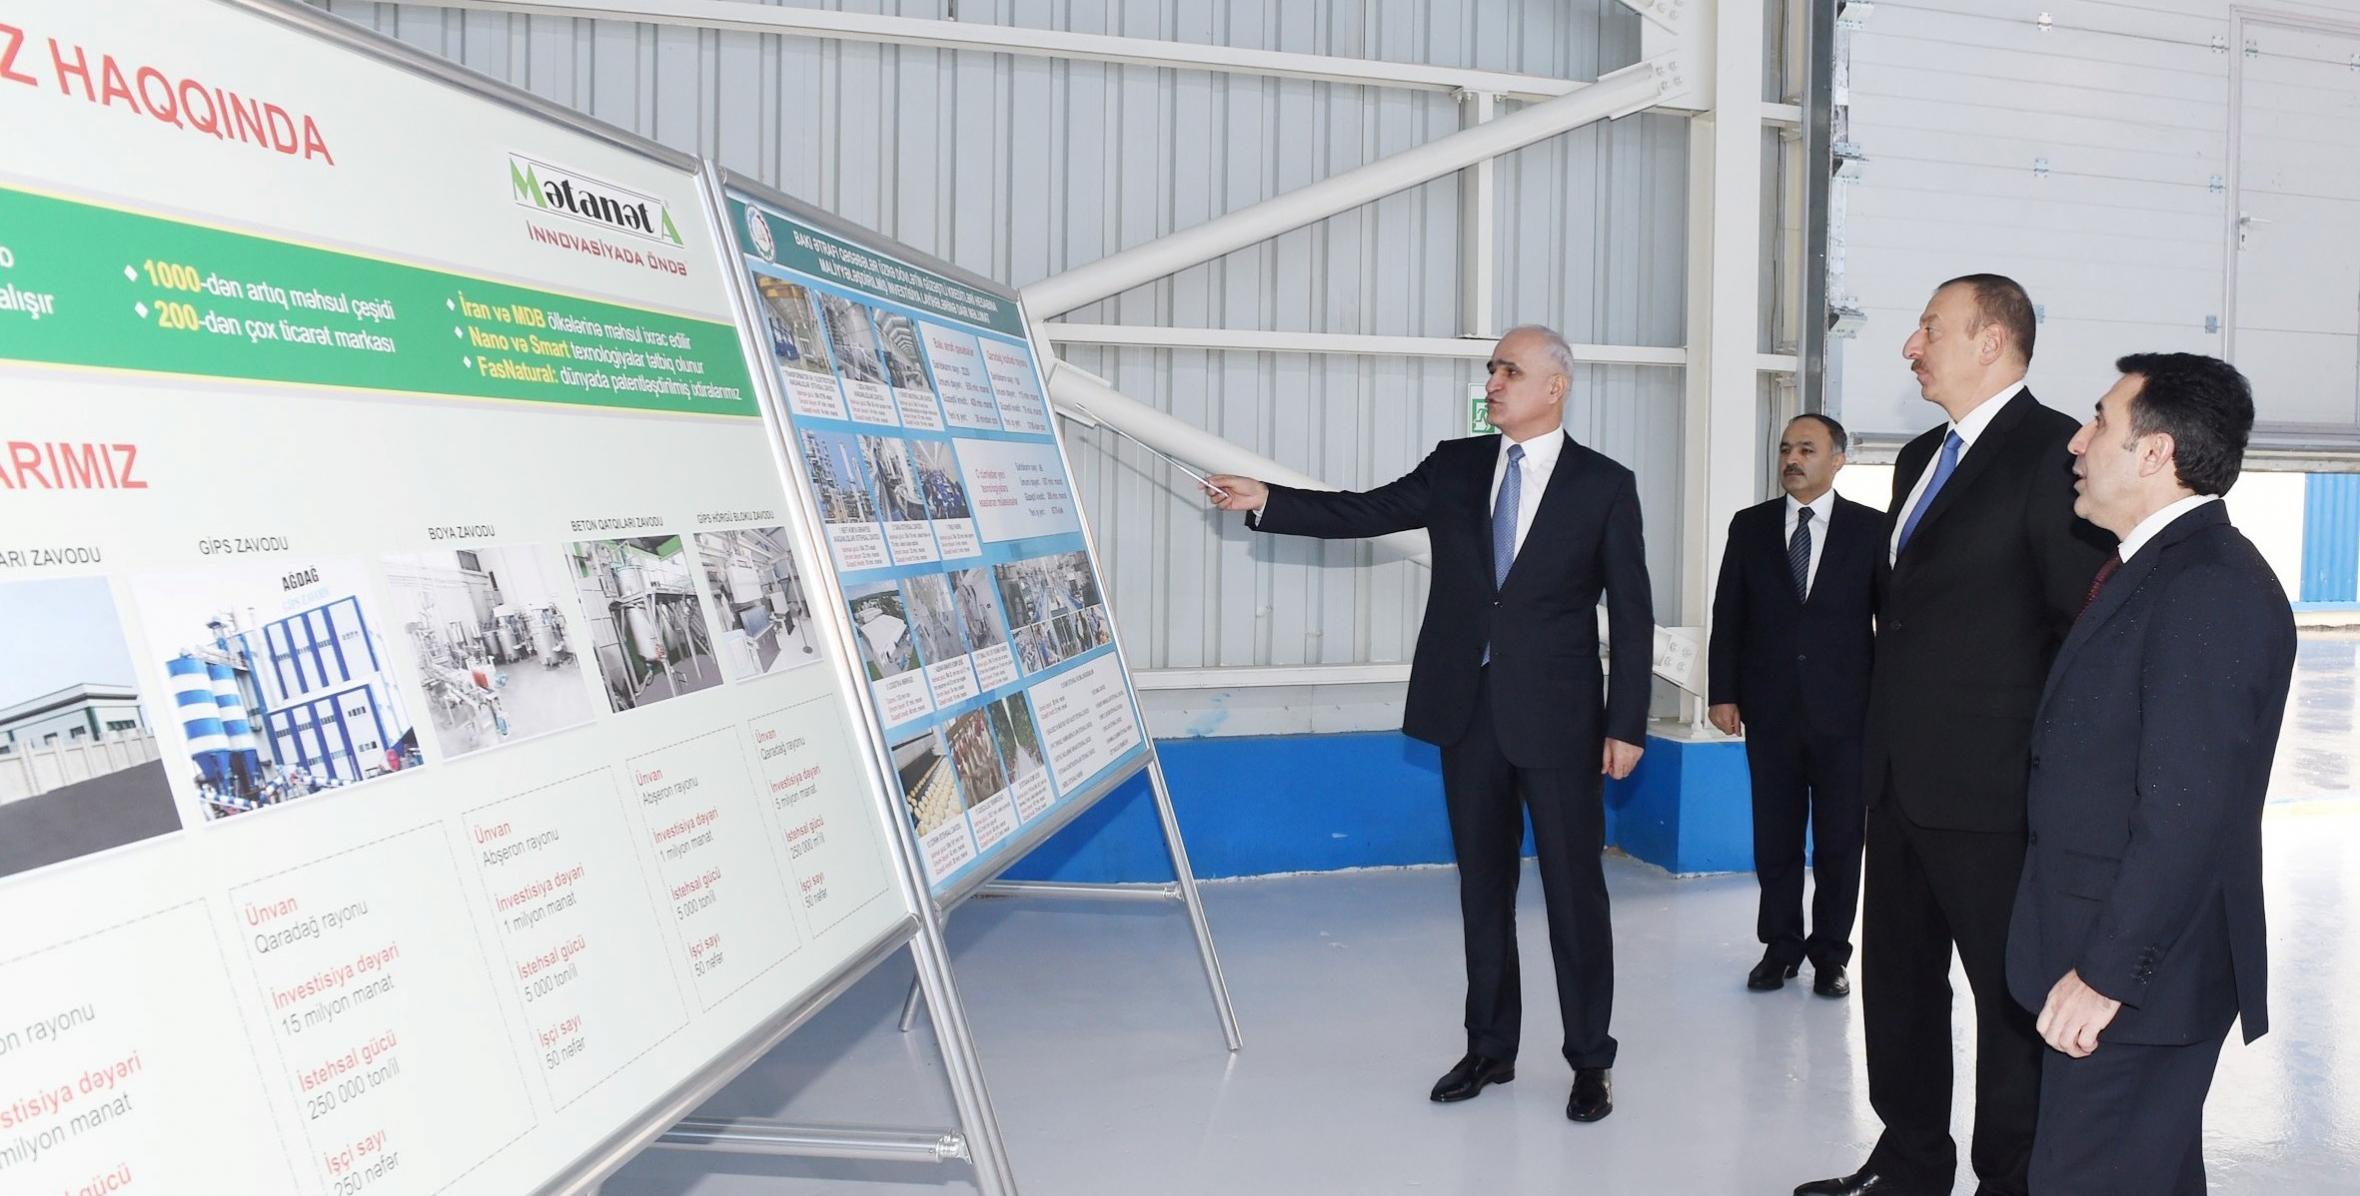 Ilham Aliyev attended the opening of Yeni Agdag gypsum plant